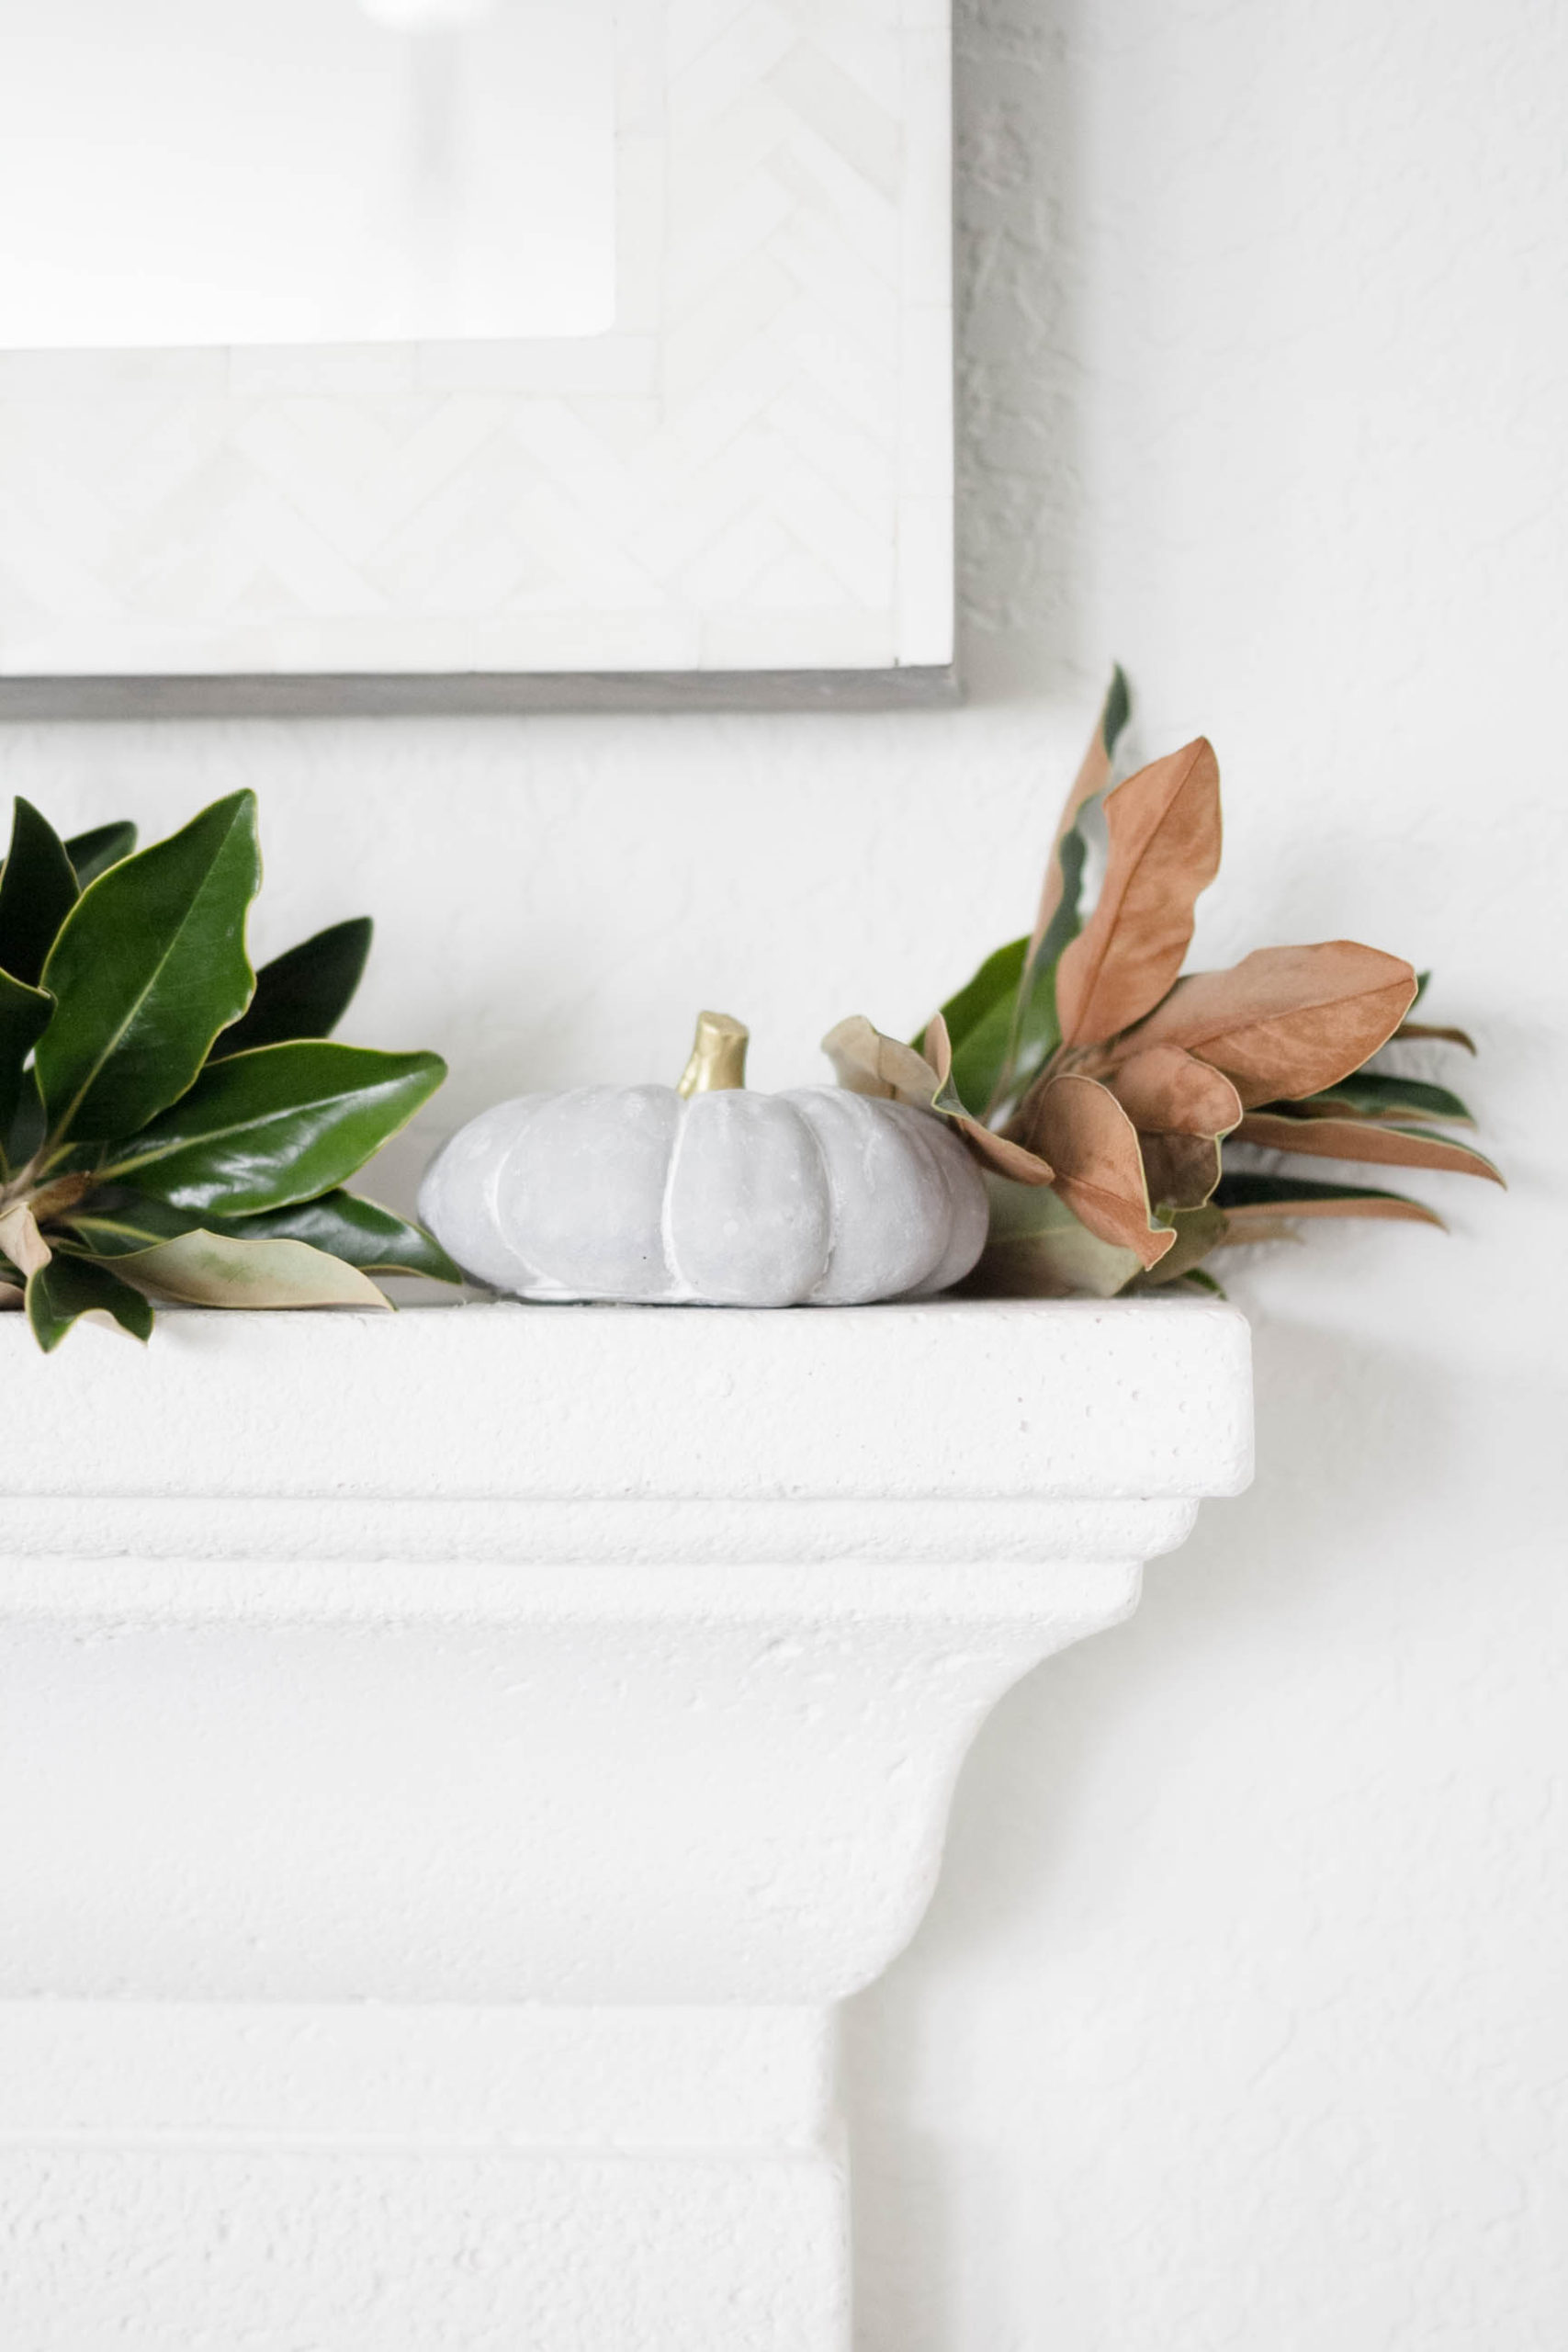 Simple Fall Decorating-Cement Pumpkins and Magnolia Branches by IrisNacole.com